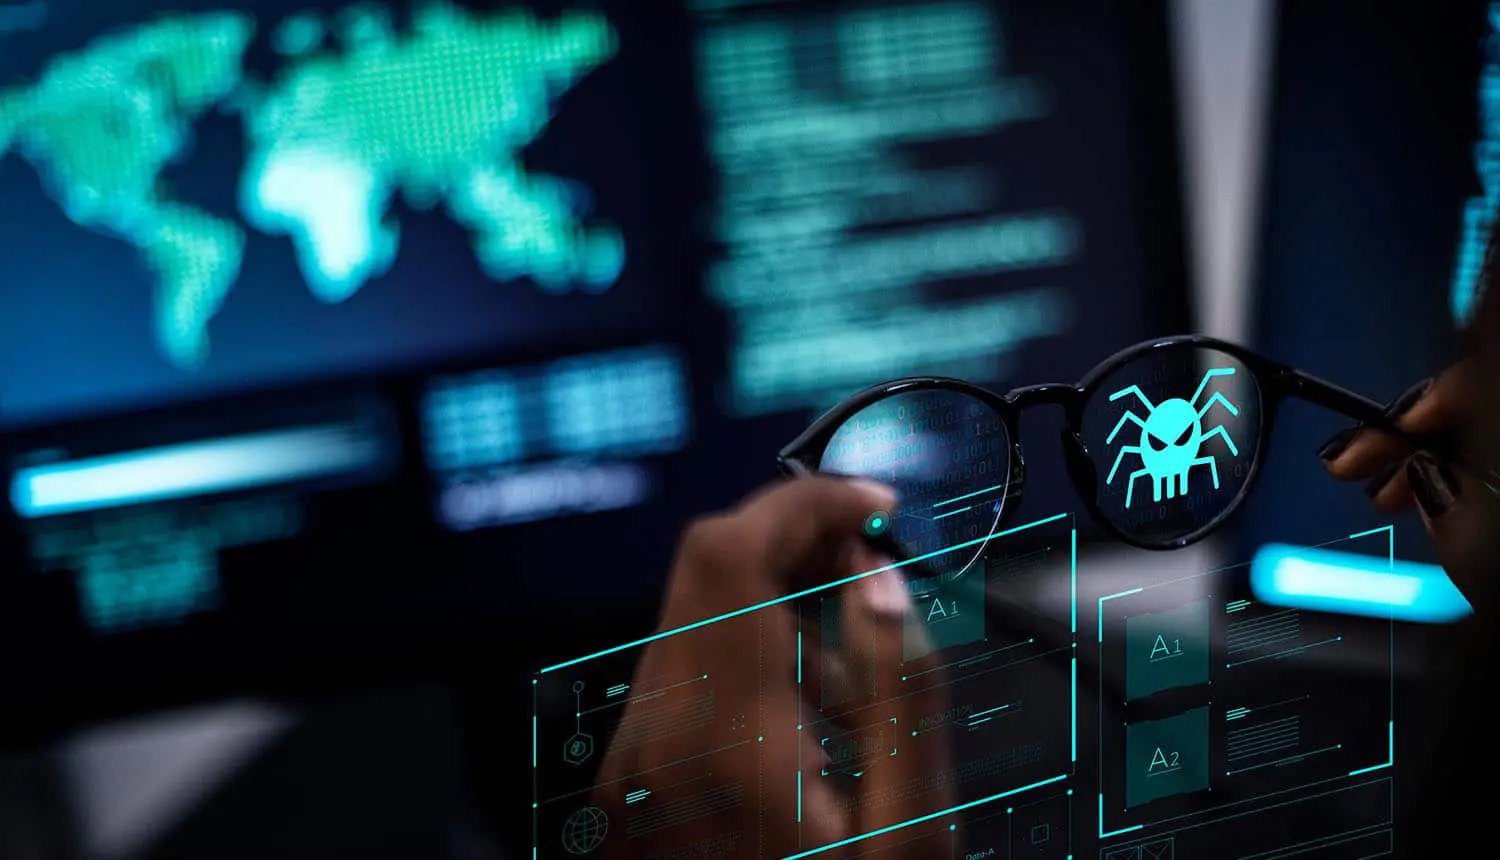 Top cybersecurity predictions for African businesses in 2023, according to experts